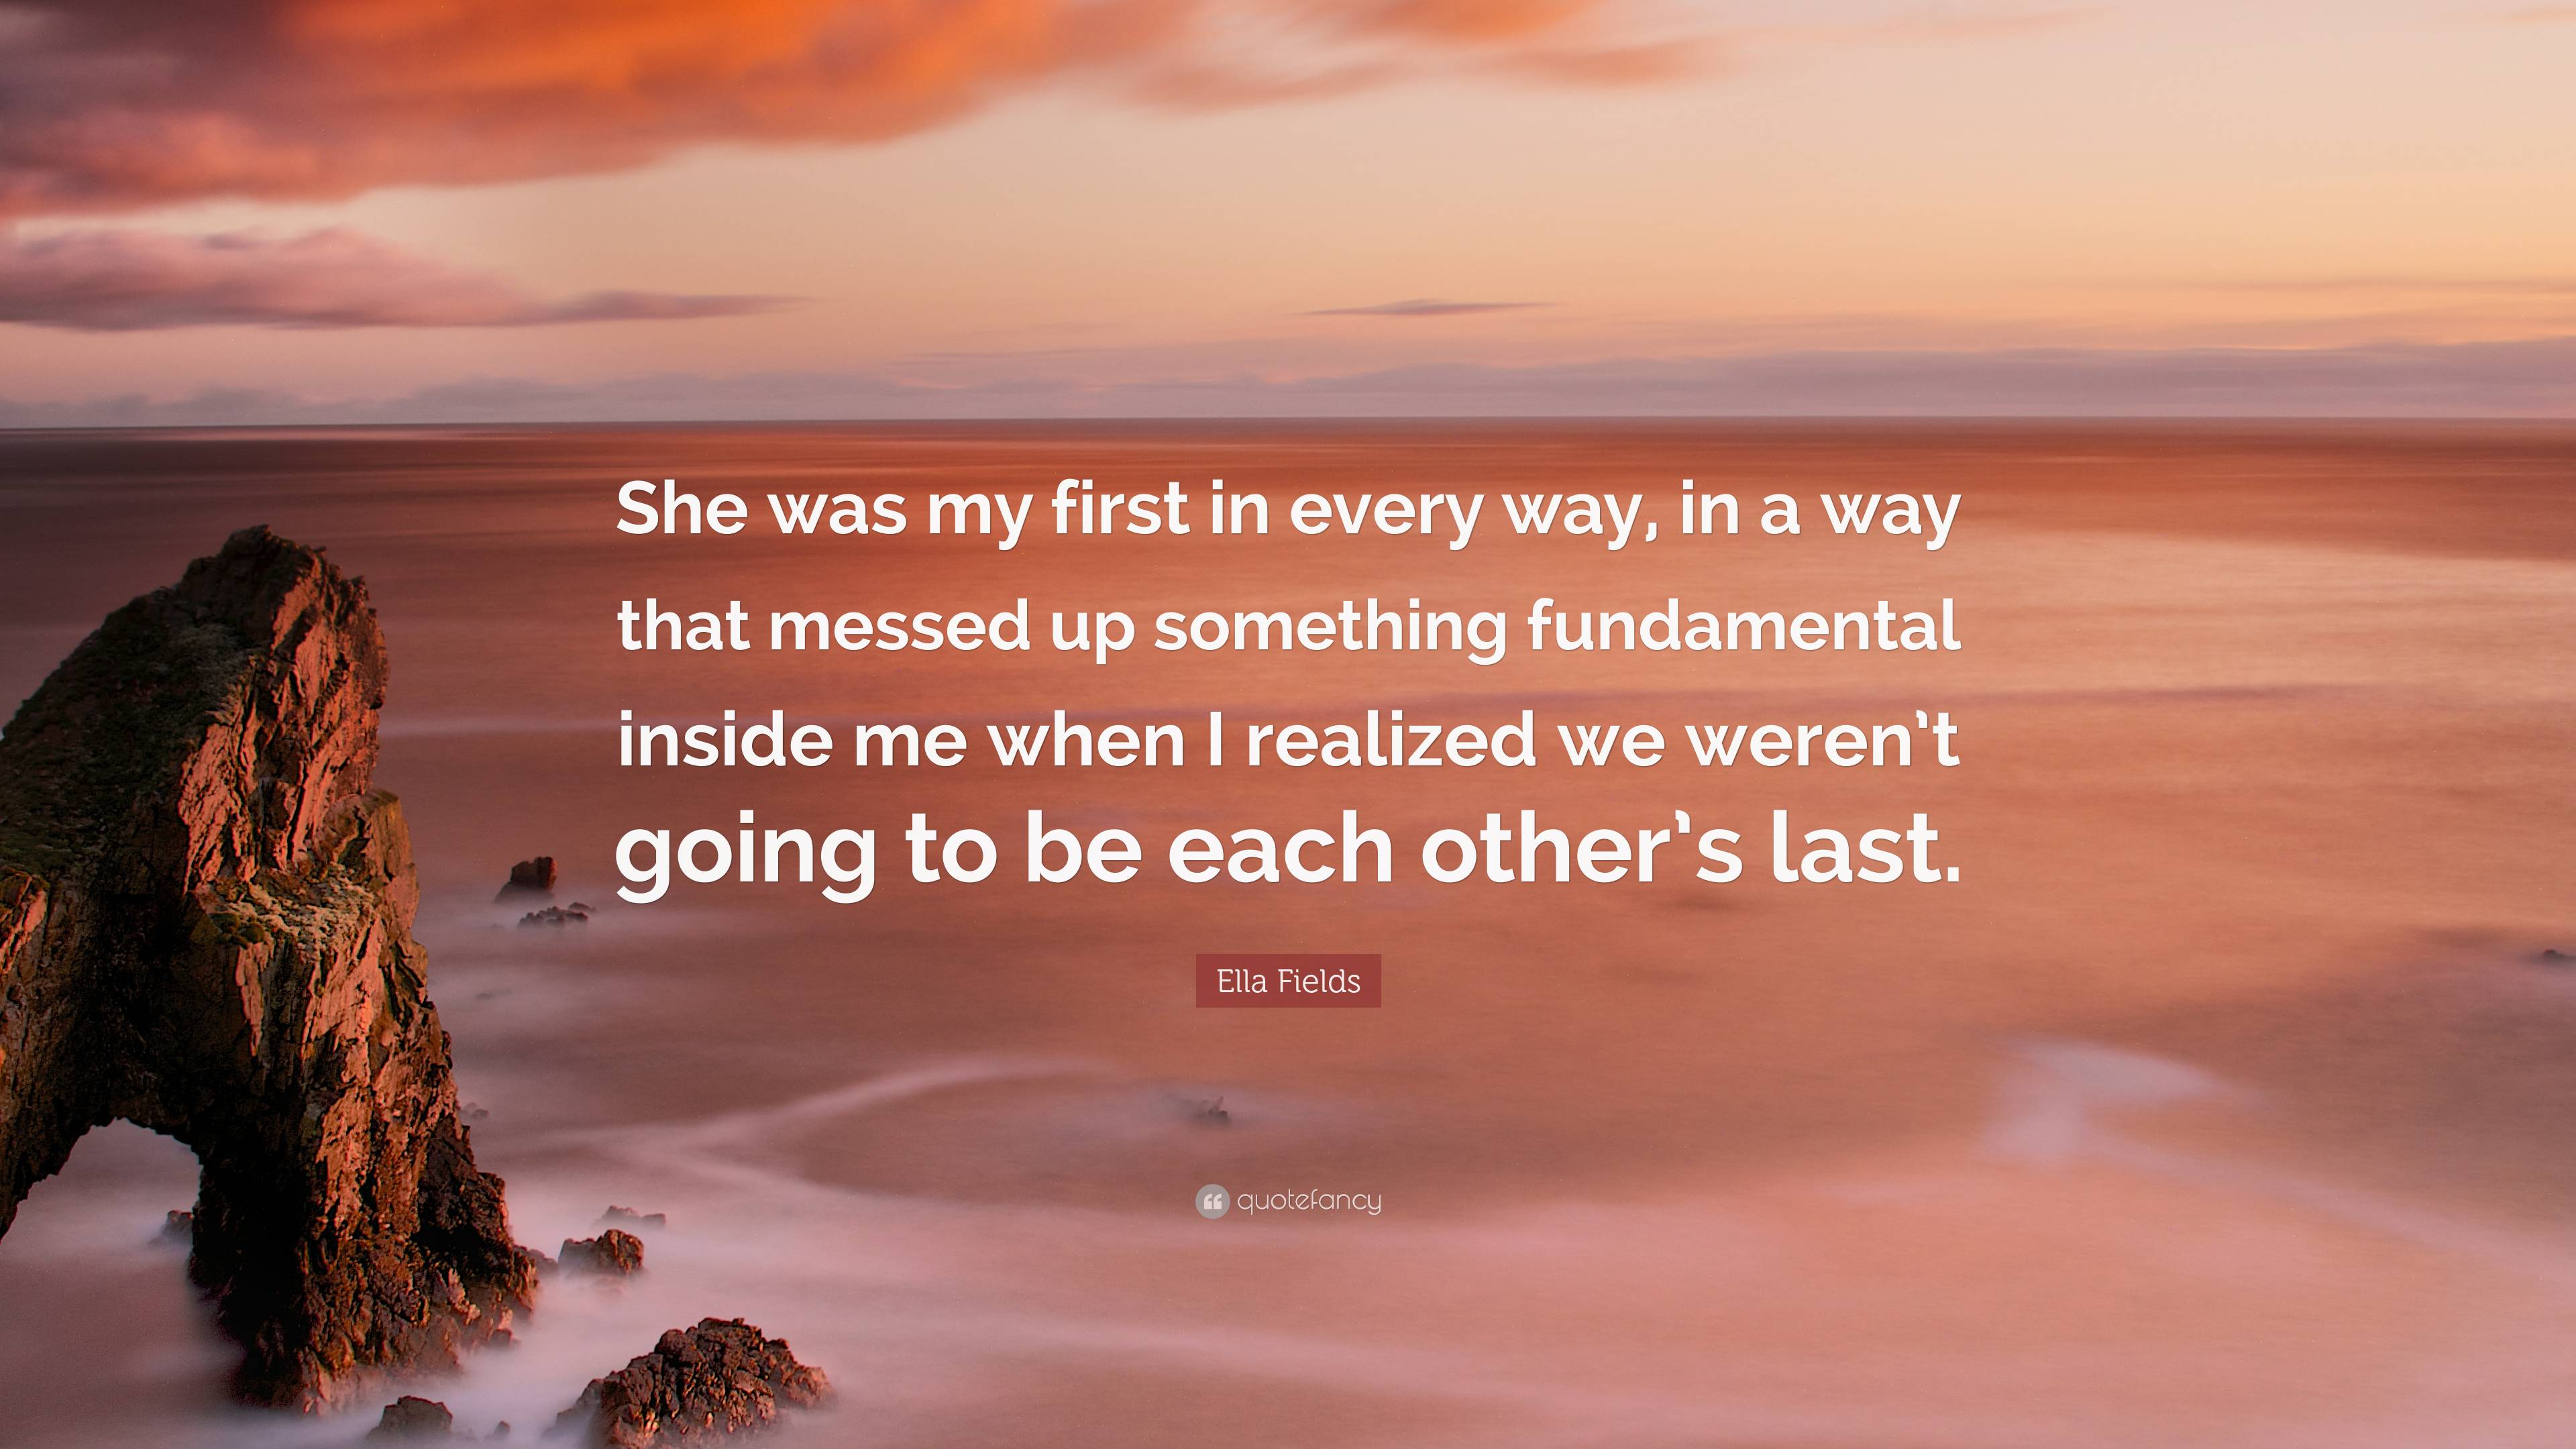 Ella Fields Quote: “She was my first in every way, in a way that messed ...